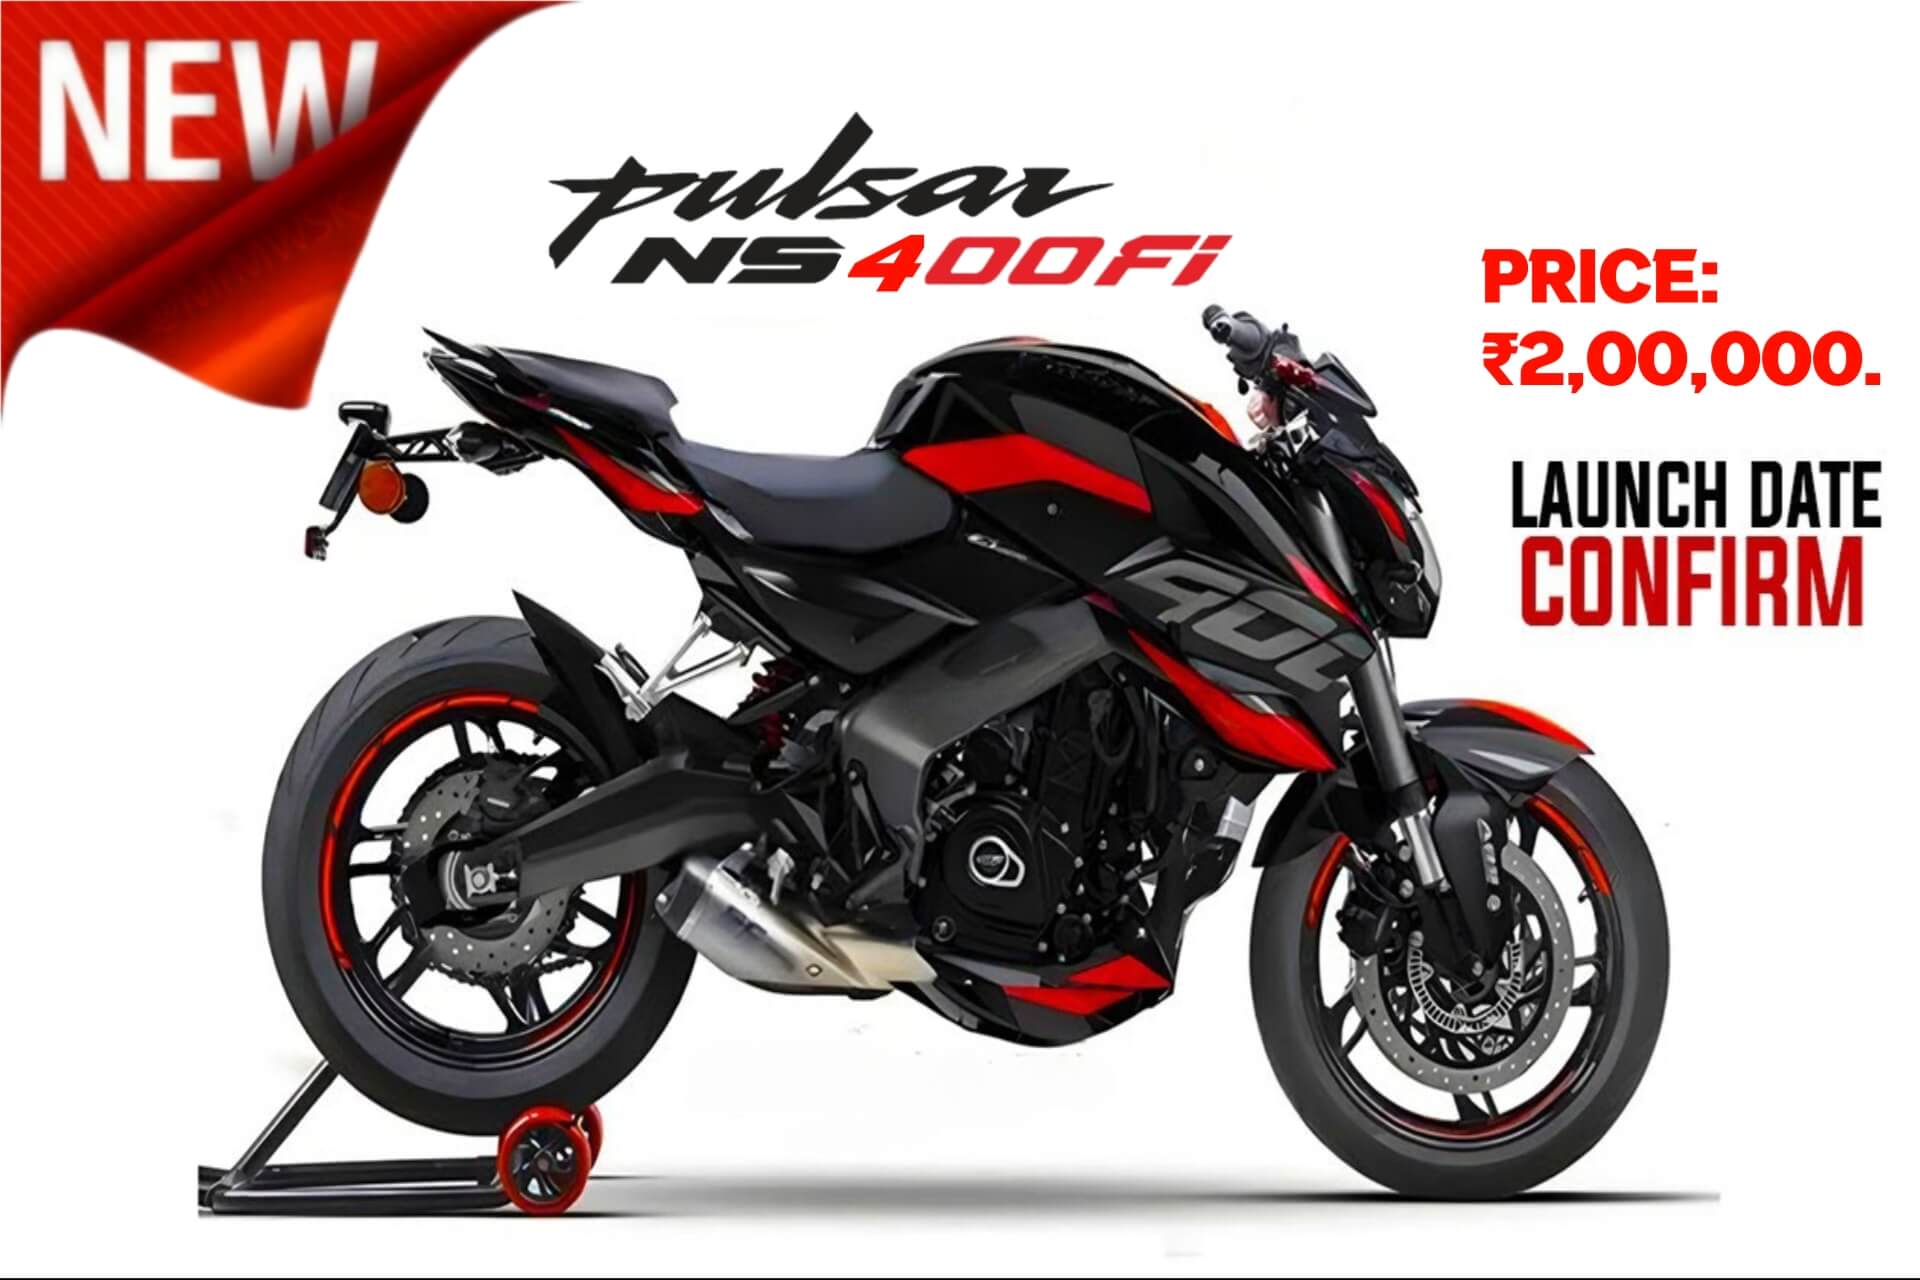 Finally 2024 New Bajaj Pulsar NS400 Bike to be Launched in March, Price will be Less than 2 Lakhs!